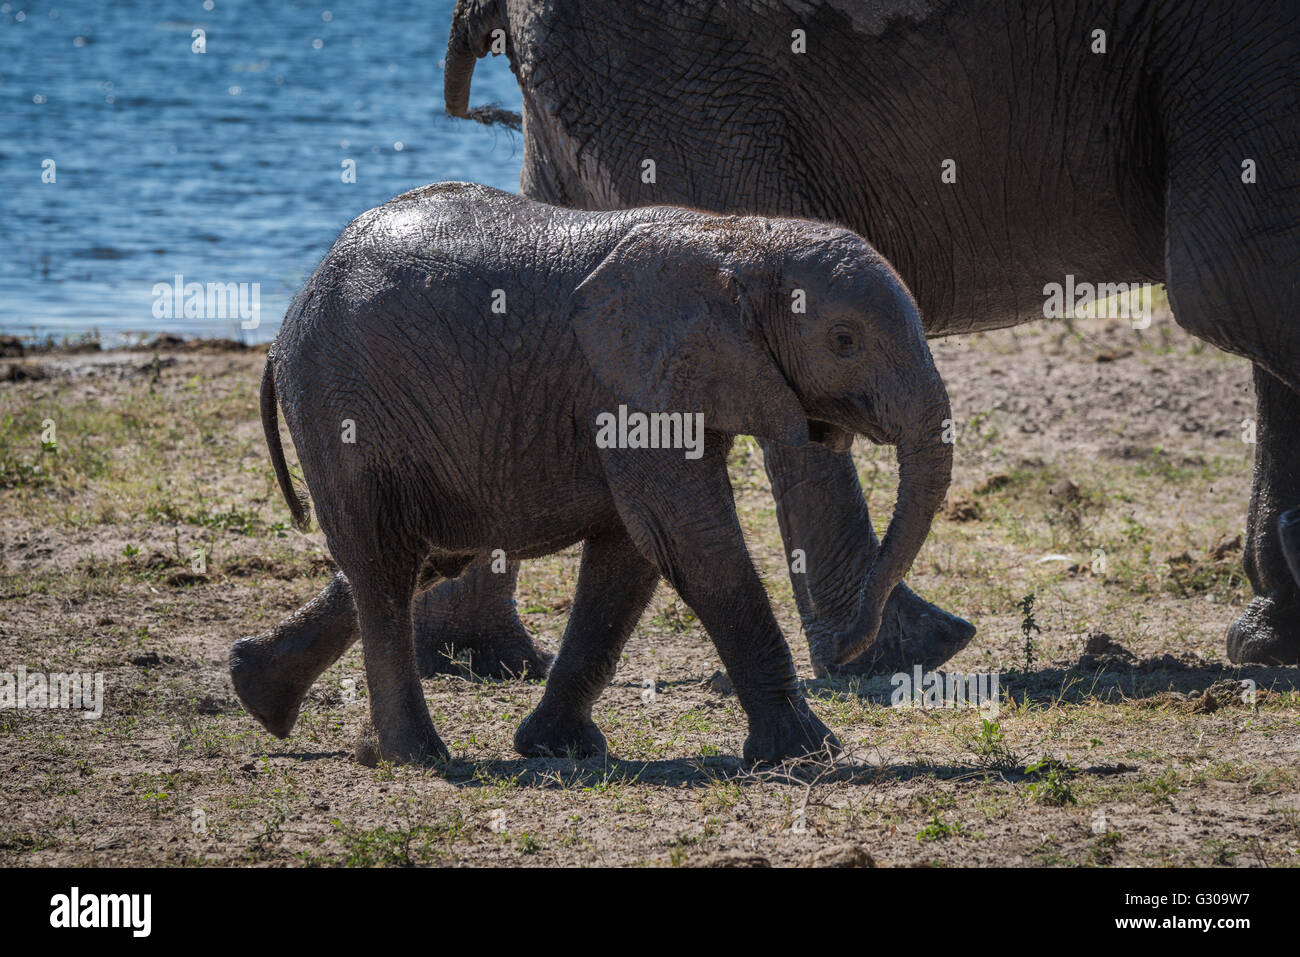 Baby elephant walking behind mother beside river Stock Photo